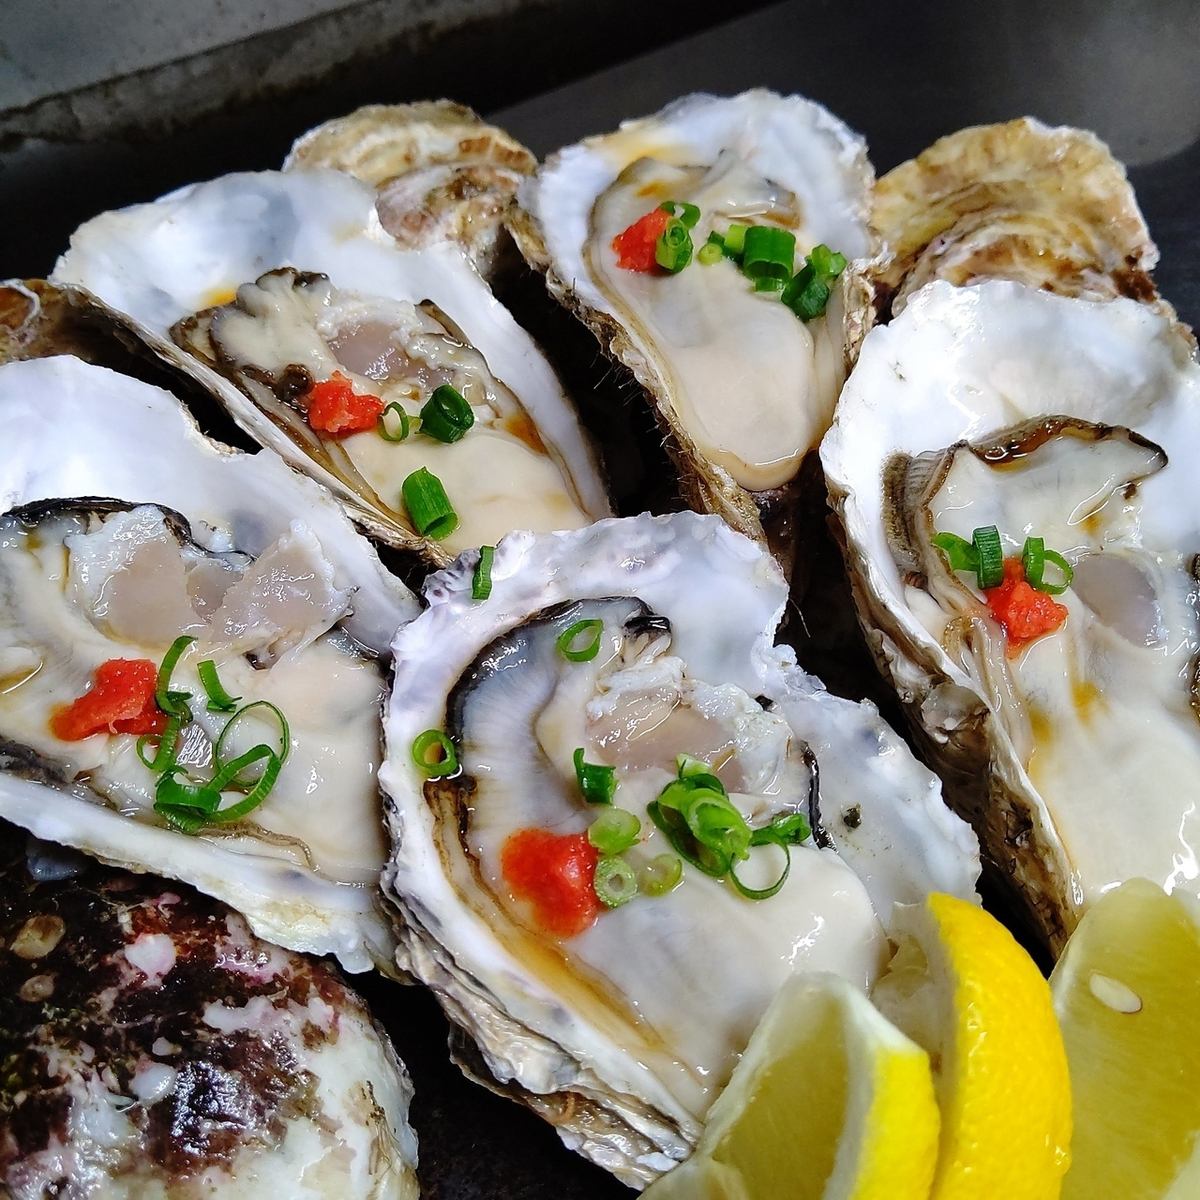 Founded 33 years ago! Draft beer 250 yen! Raw oysters 480 yen! All-you-can-drink is 2500 yen!